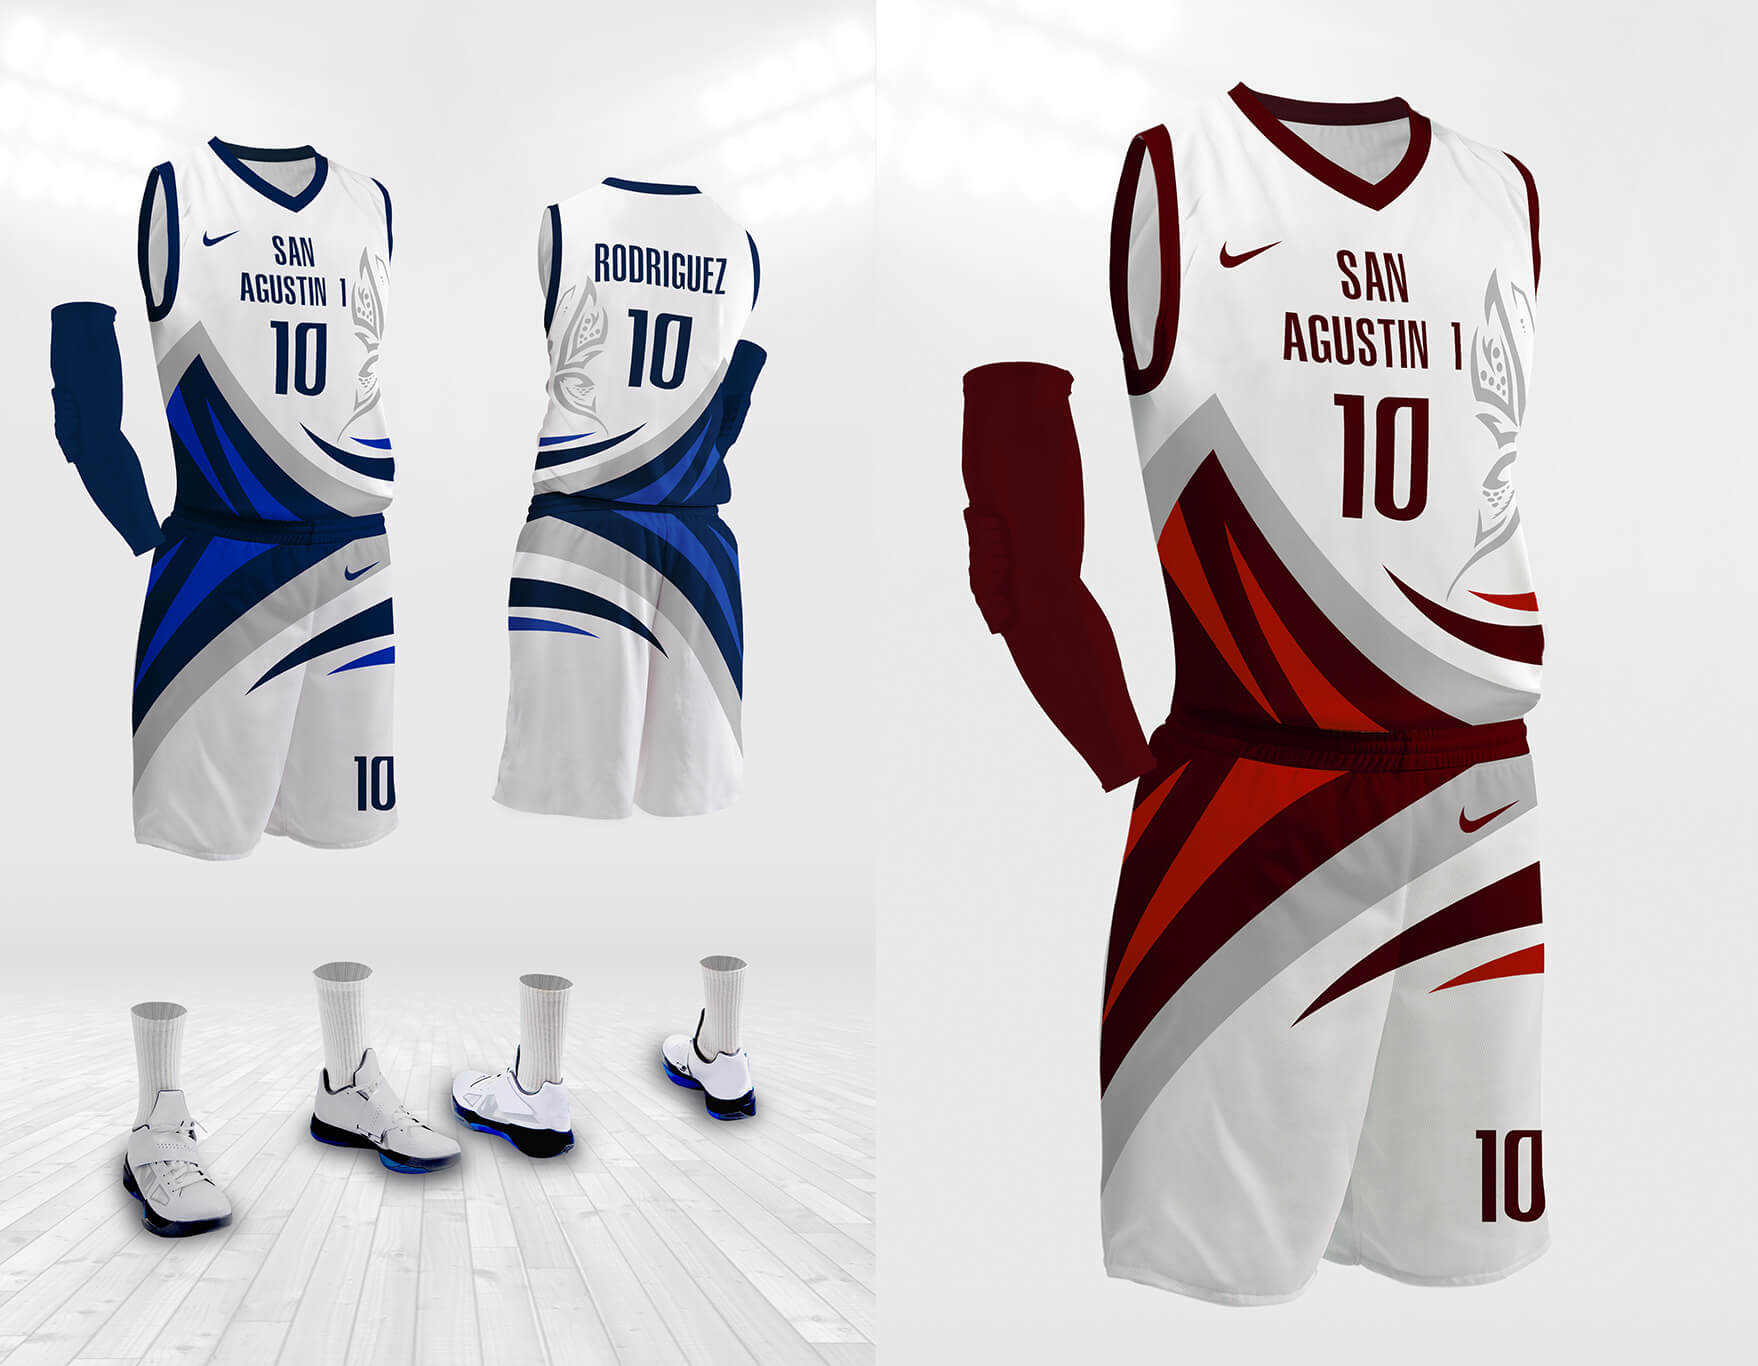 BASKETBALL JERSEY MOCKUP 2023 - BASKETBALL DESIGN FOR SUBLIMATION USING  PHOTOSHOP! FROM SCRATCH! 